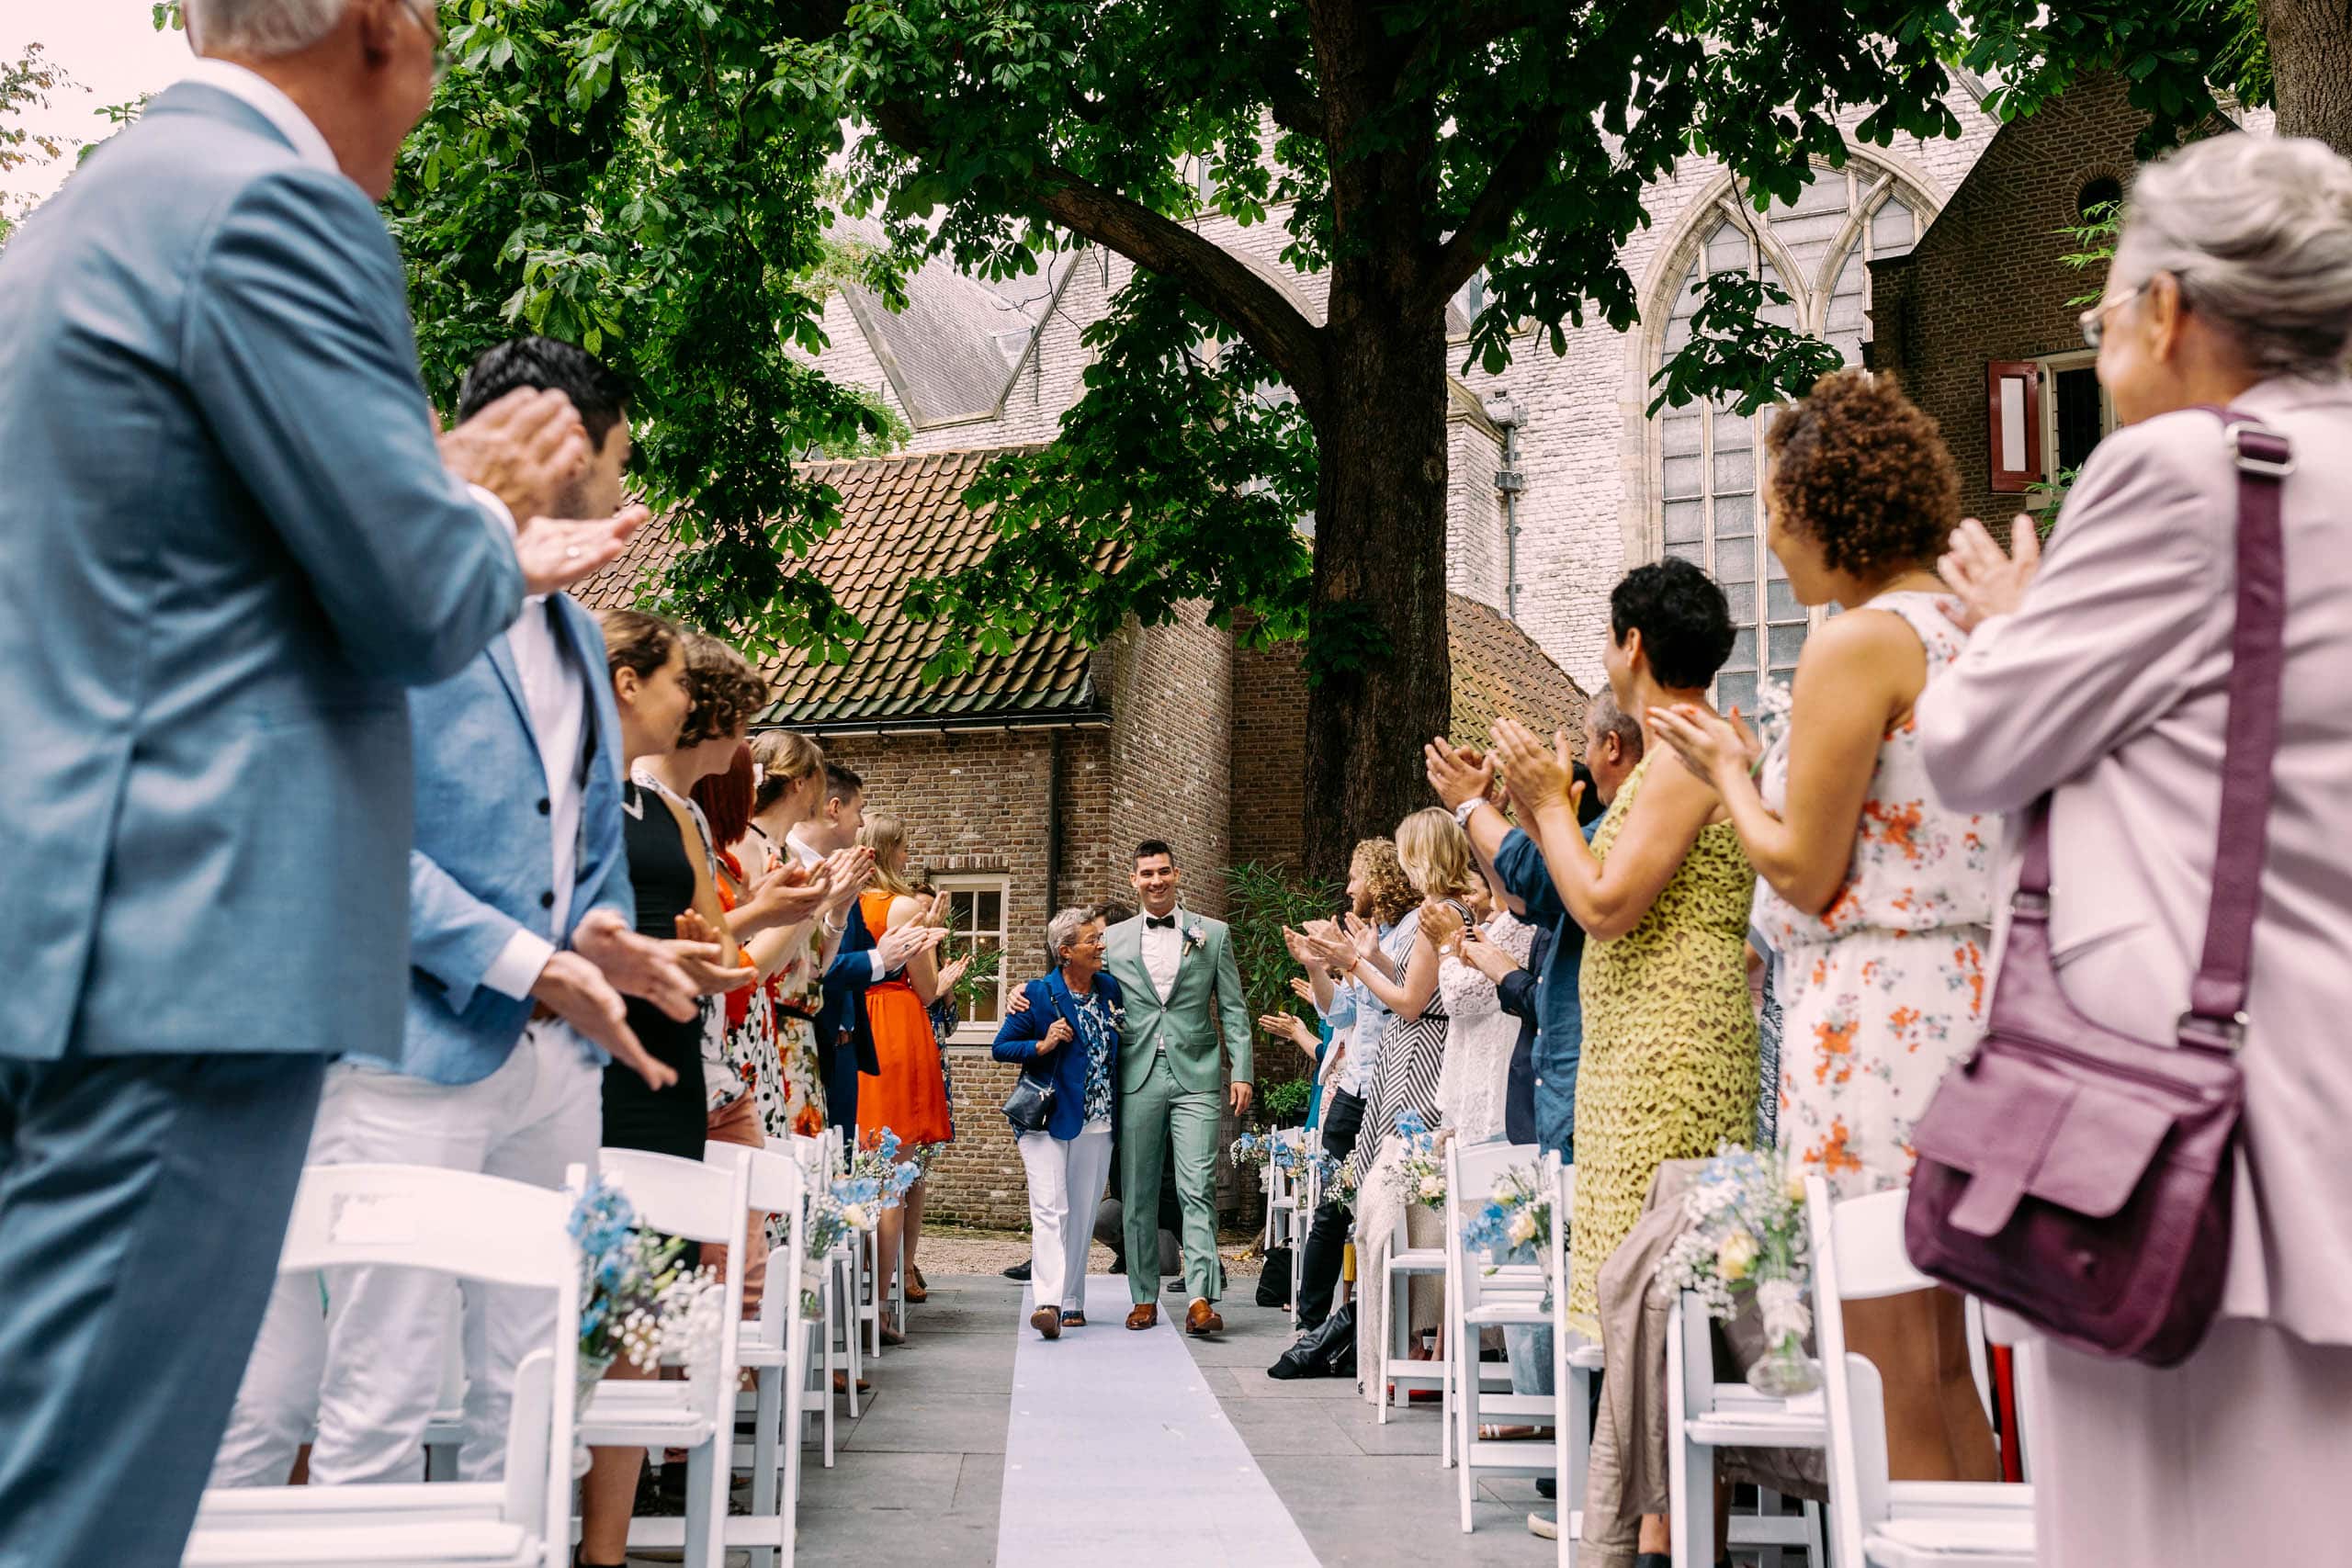 A wedding ceremony in a courtyard with people applauding.